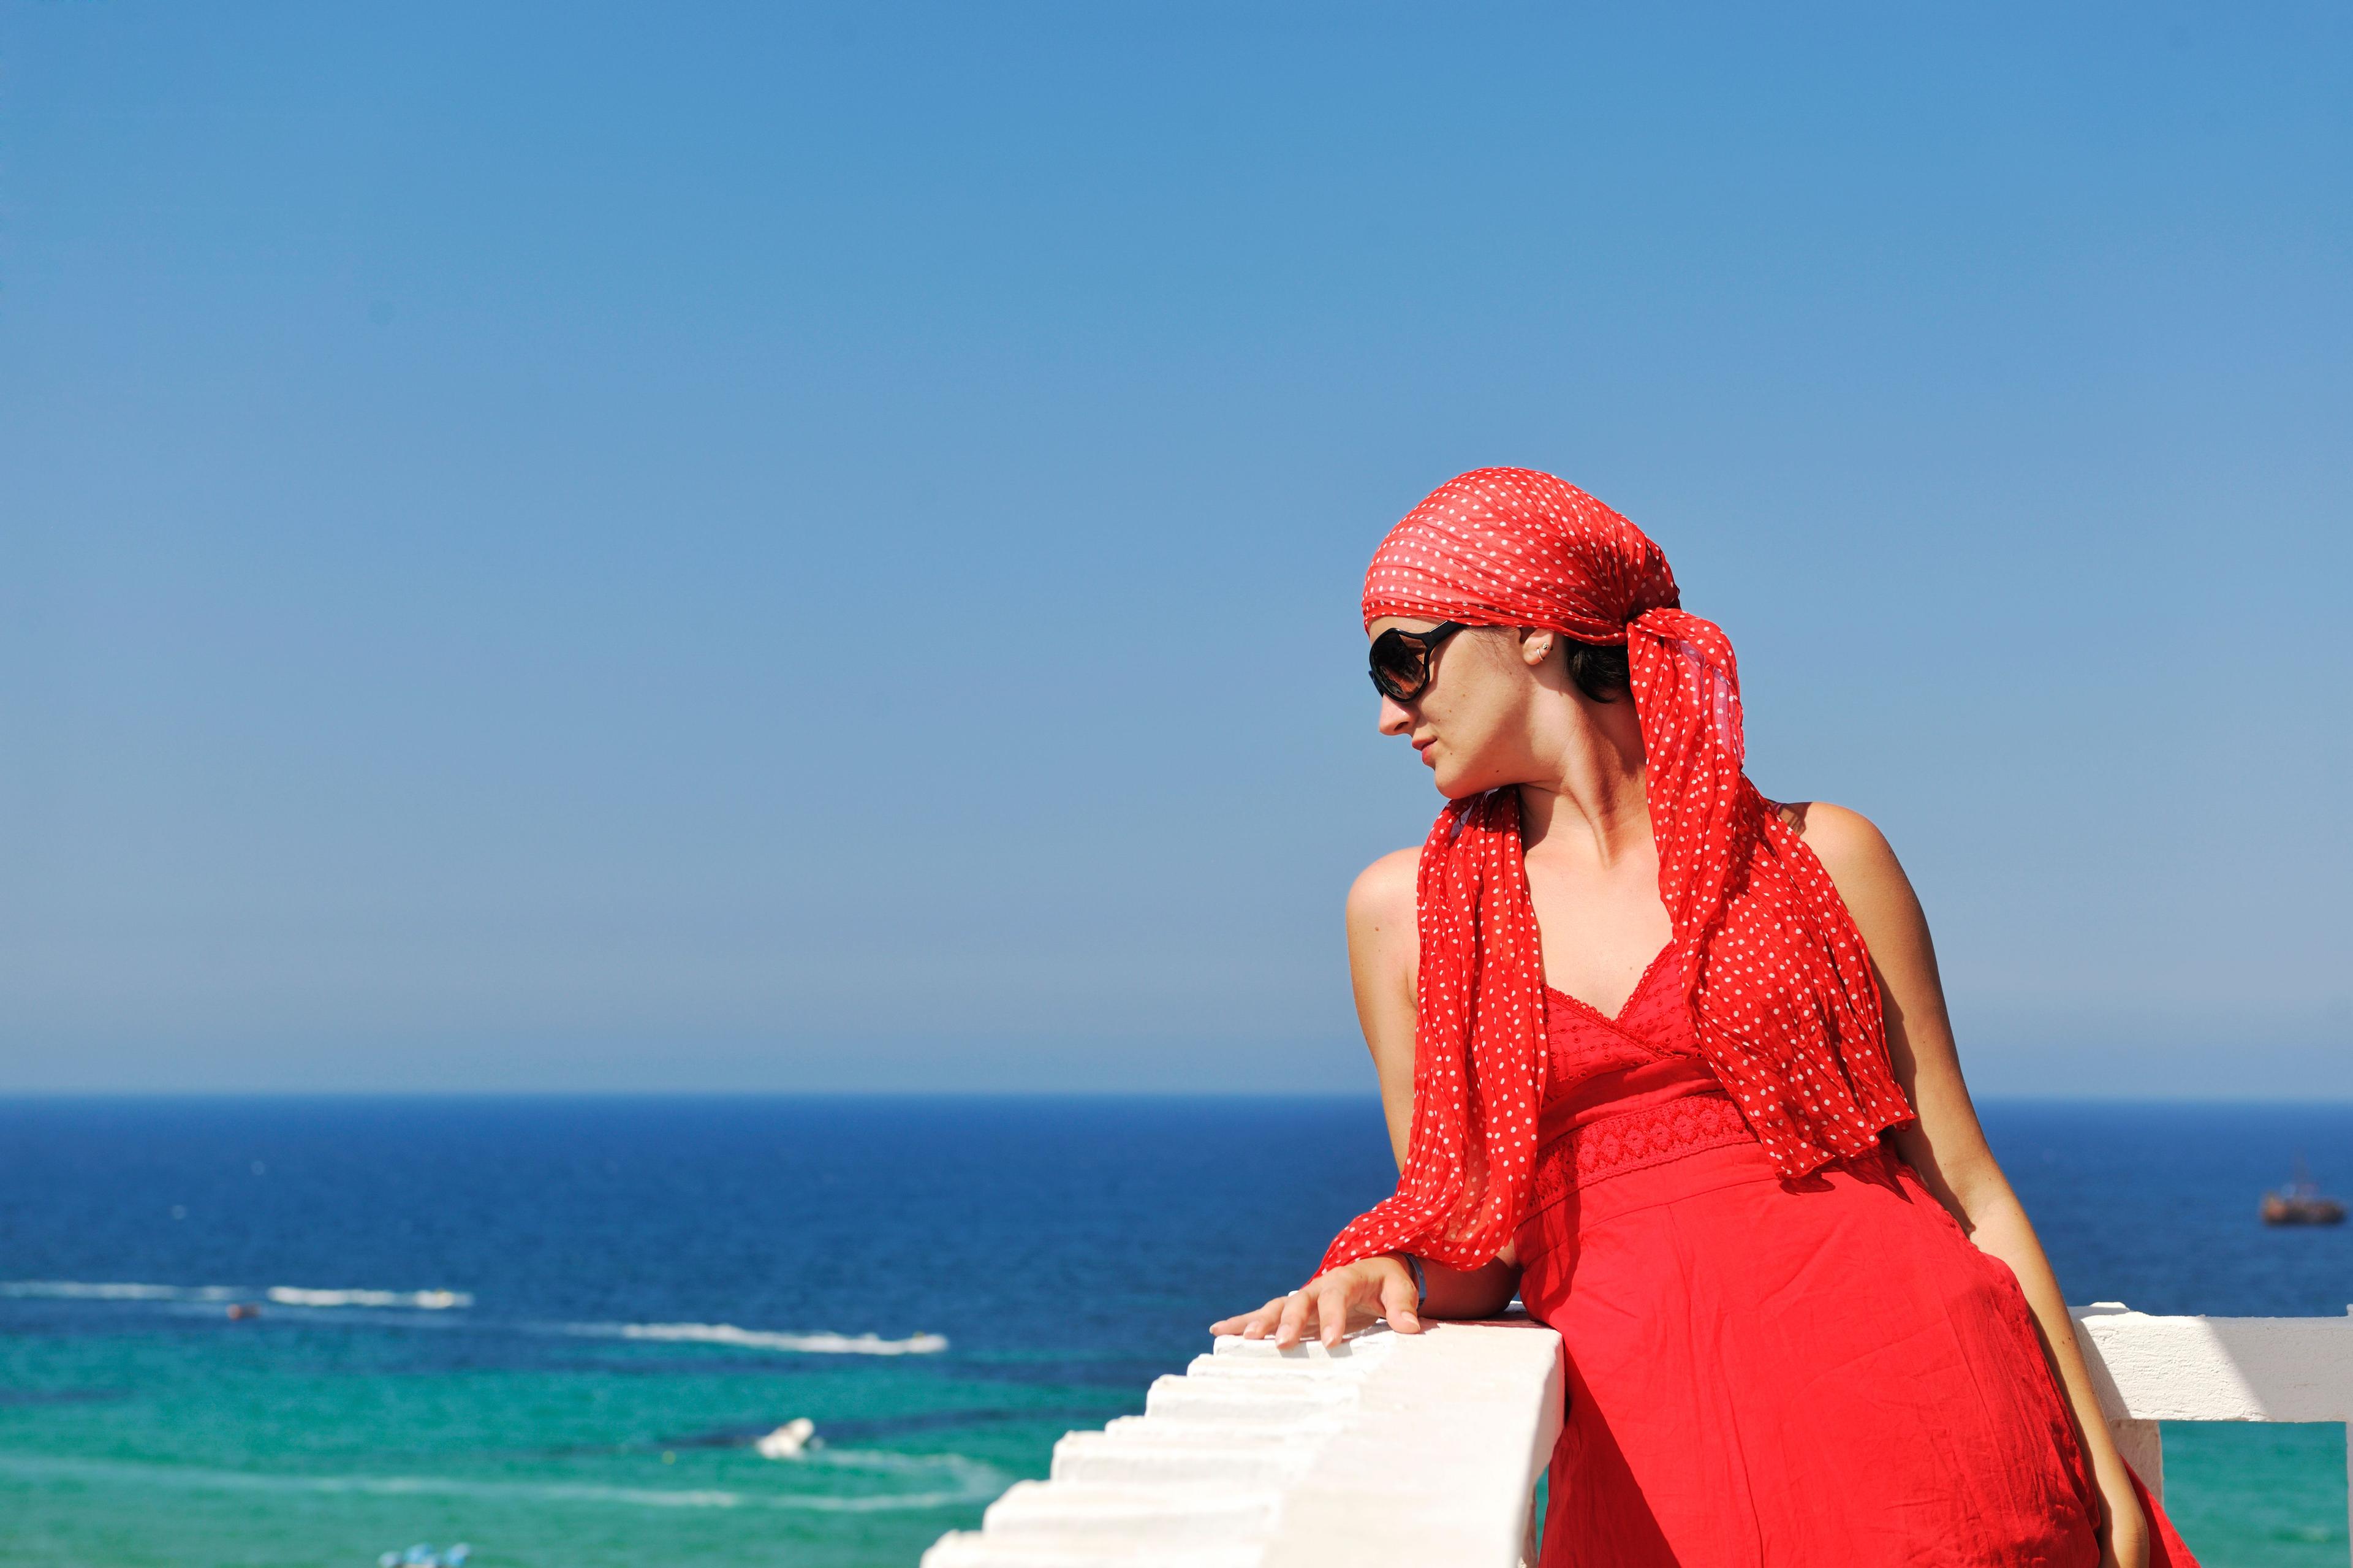 The top 5 destinations to visit in Tunisia